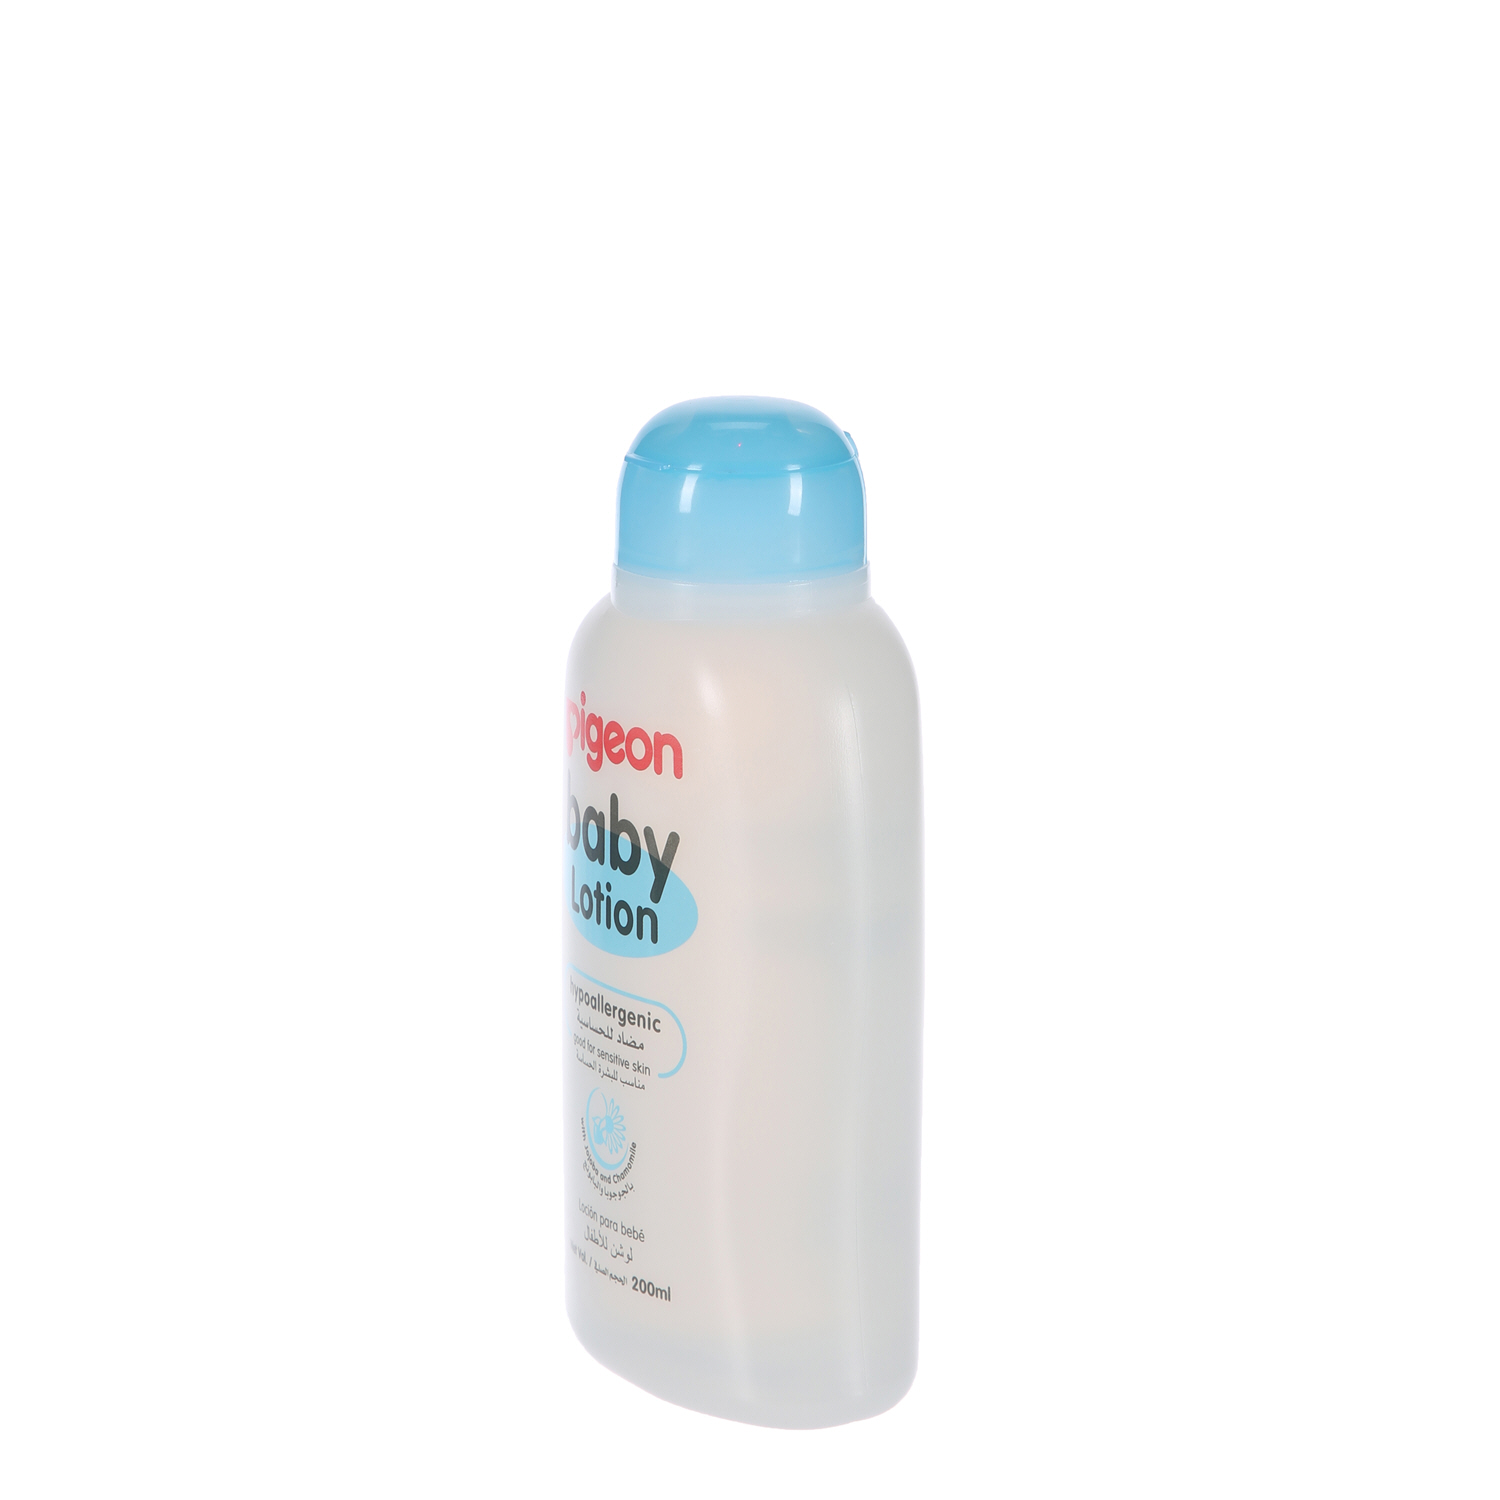 Pigeon Baby Lotion 200ml